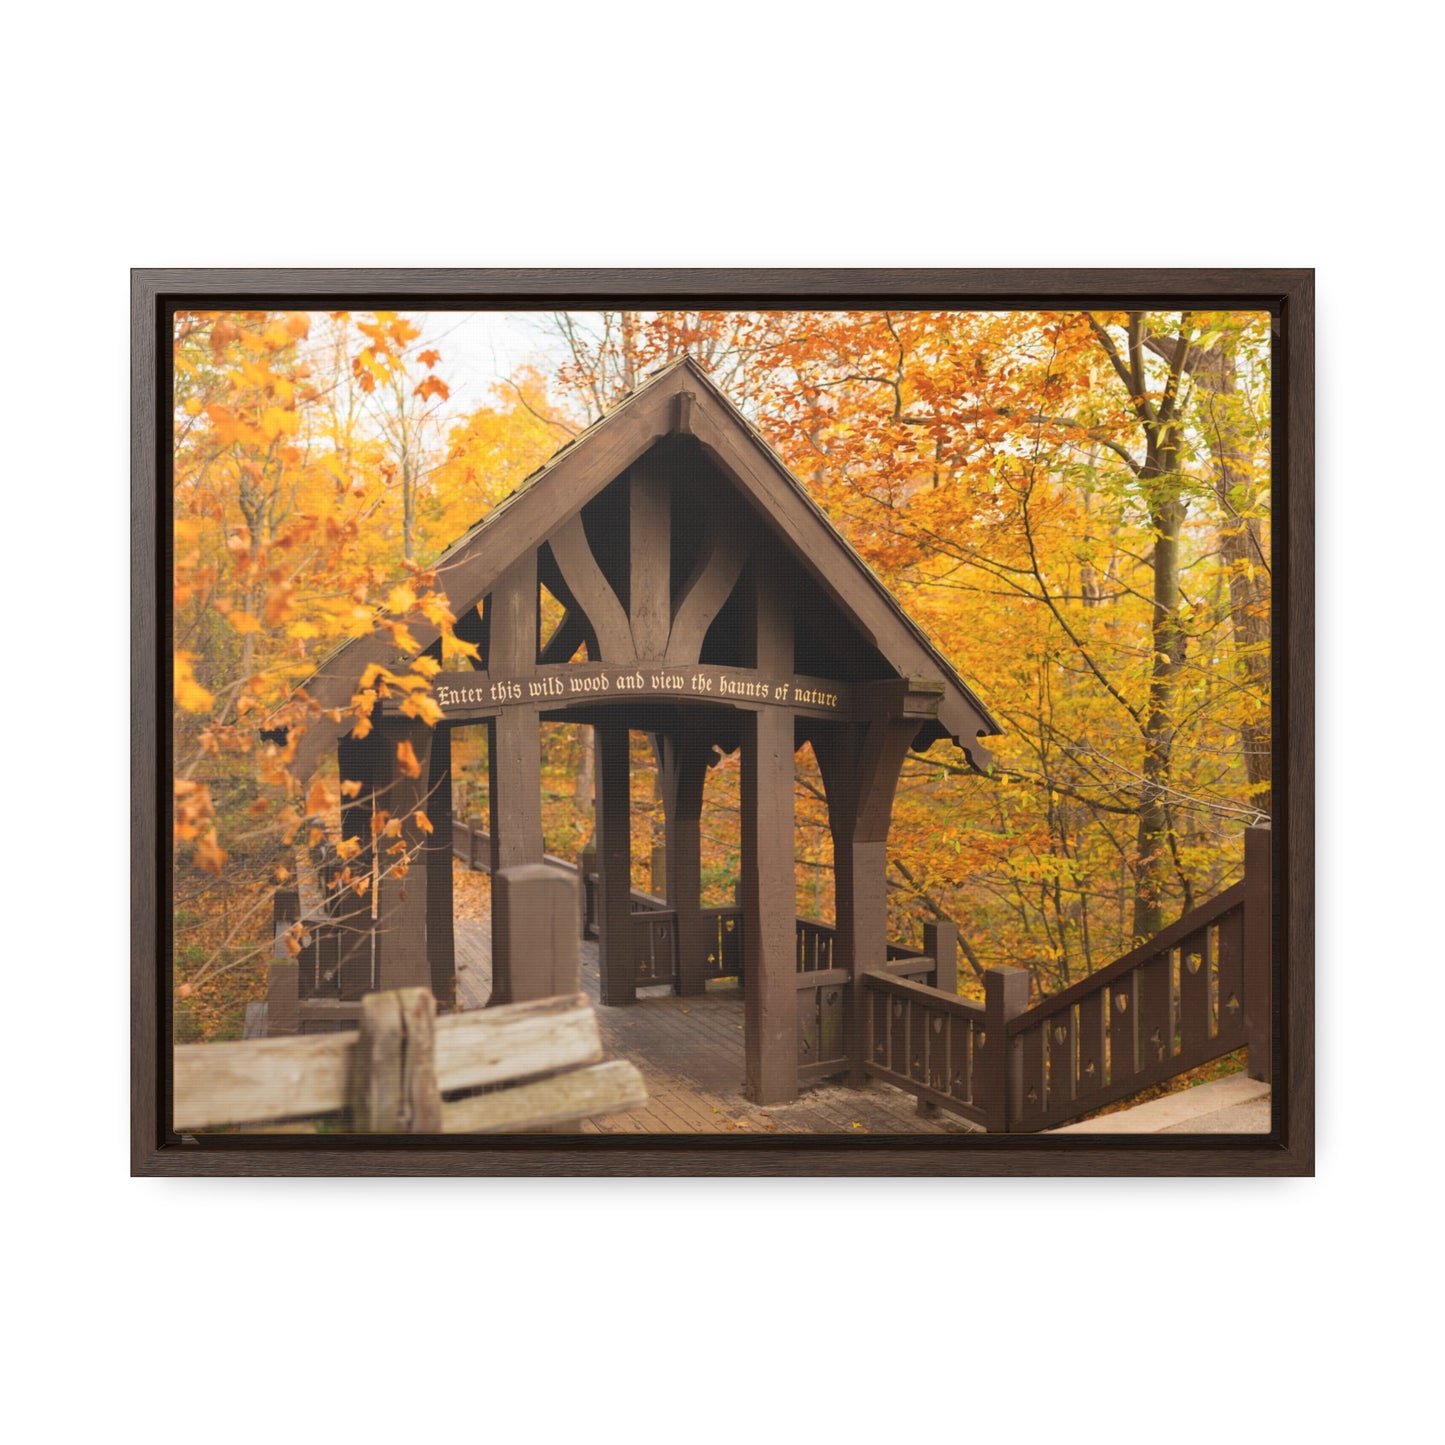 7 Bridges Trail’s Covered Bridge at Grant Park in South Milwaukee Wisconsin, Photography Framed Canvas Wrap Wall Art